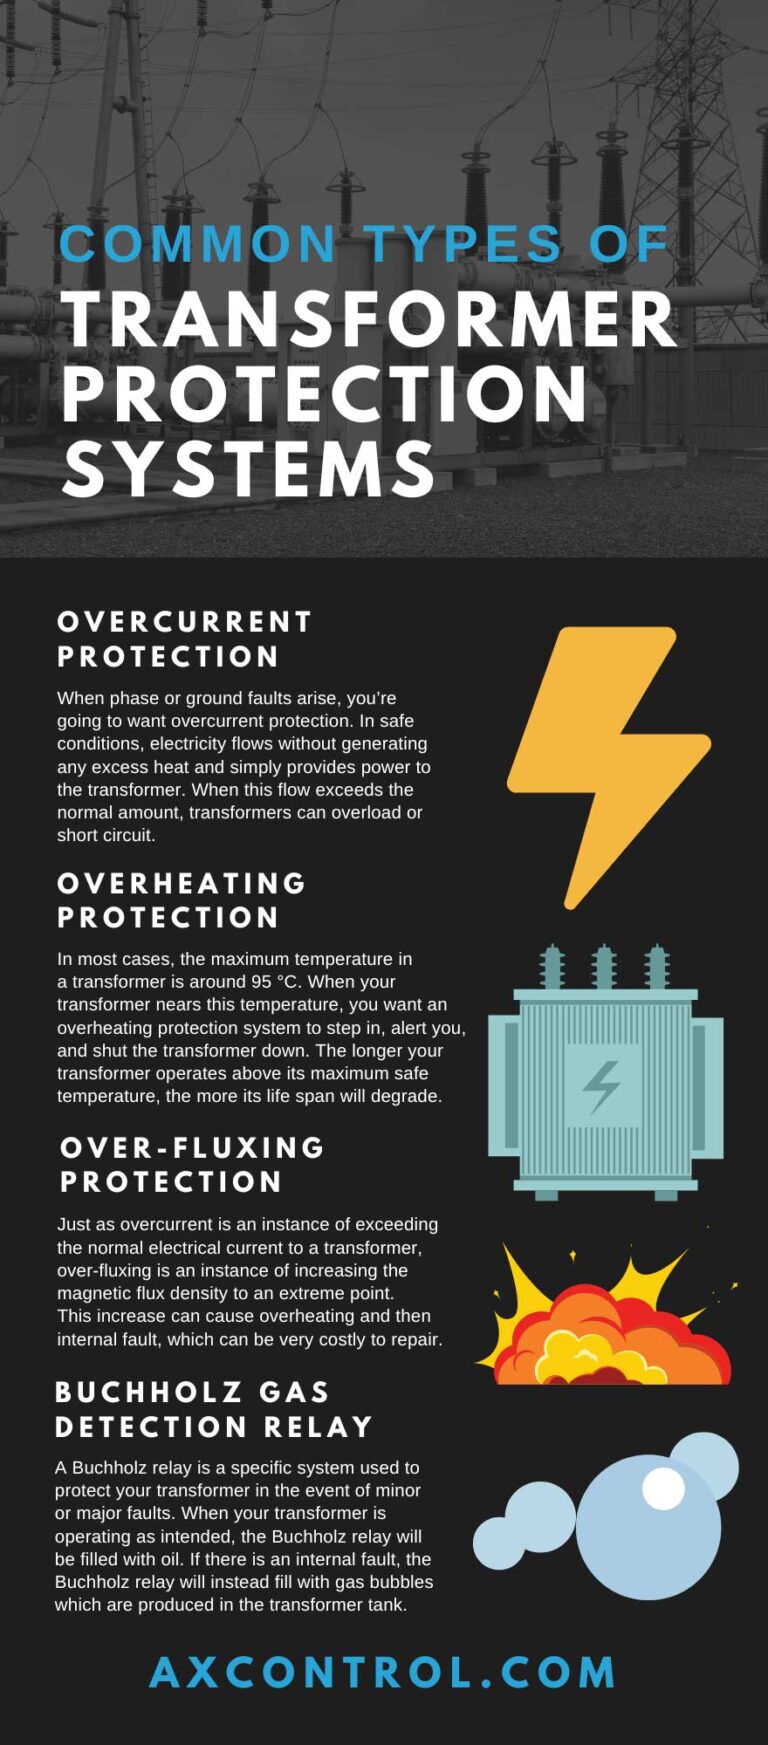 Protection Strategies for Safeguarding Step-Down Transformers Against Faults